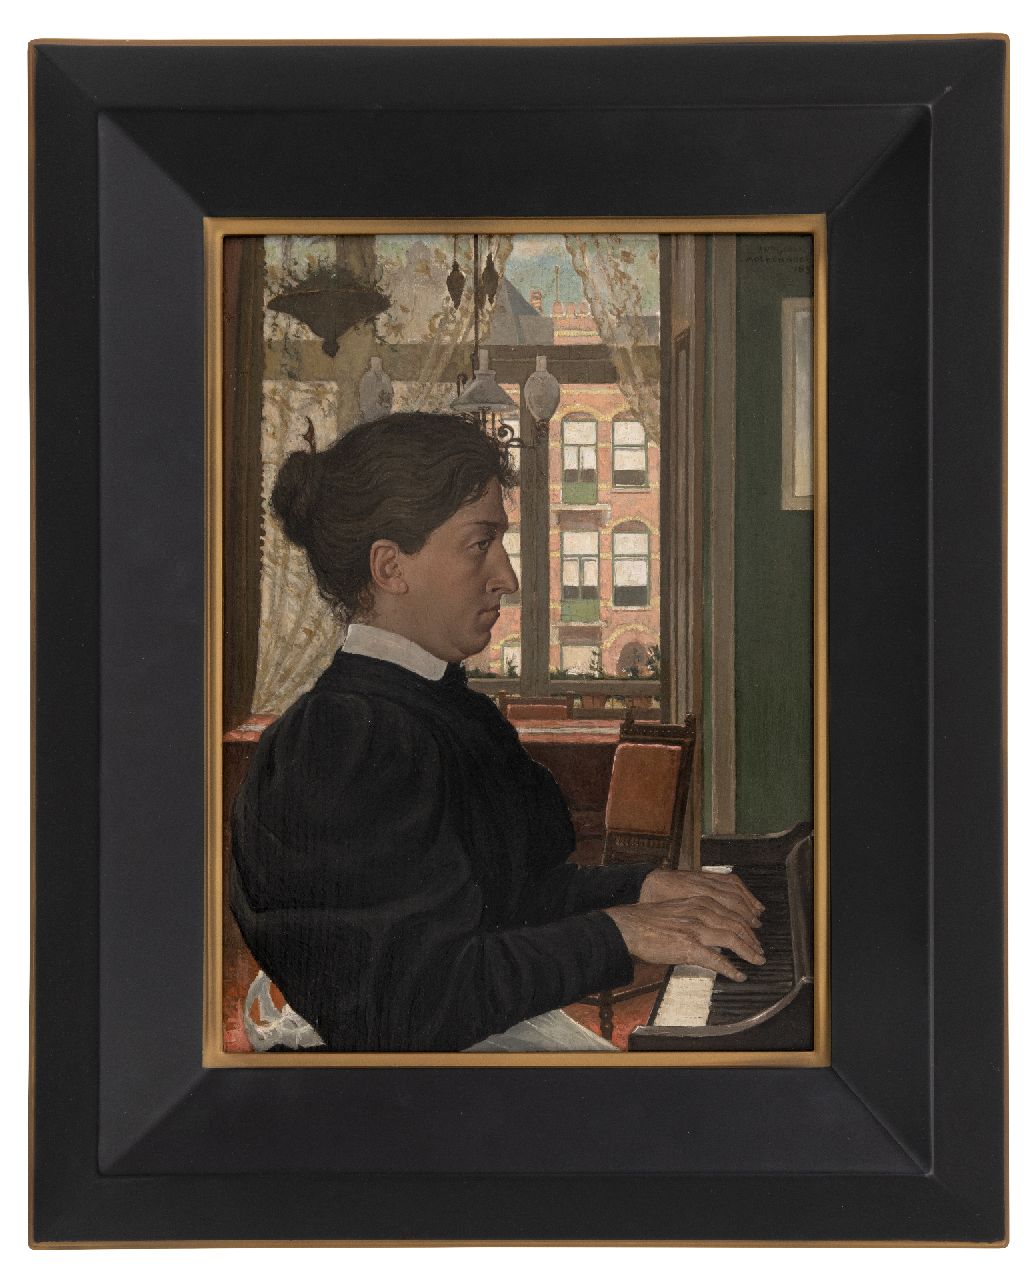 Molkenboer A.H.J.  | Antonius Henricus Johannes 'Anton' Molkenboer | Paintings offered for sale | A woman playing the paino, oil on panel 36.3 x 26.8 cm, signed u.r. and dated 1897